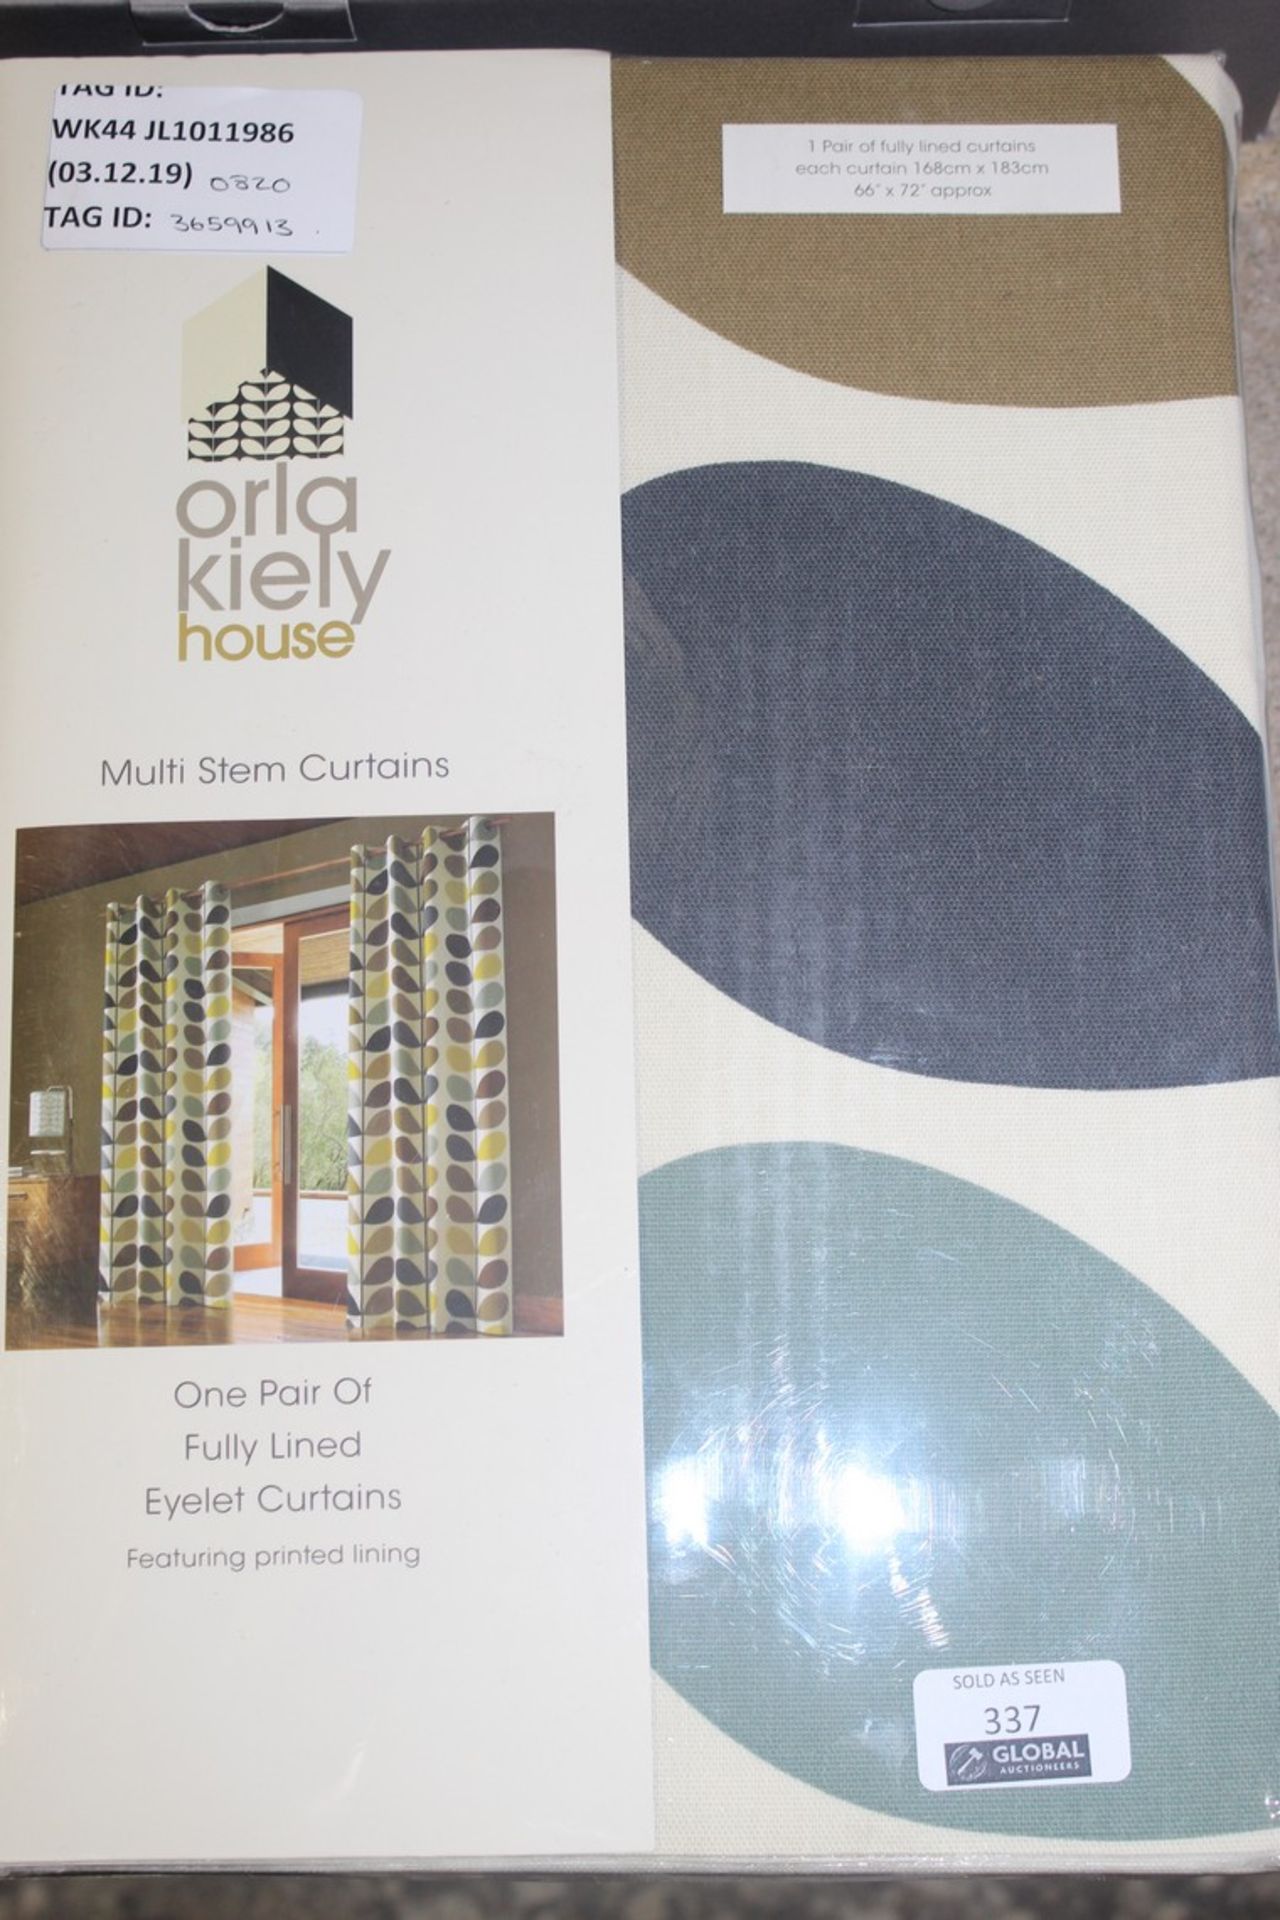 Bagged Pair of Orla Kiely Curtains RRP £62 (3692213) (Public Viewing and Appraisals Available)